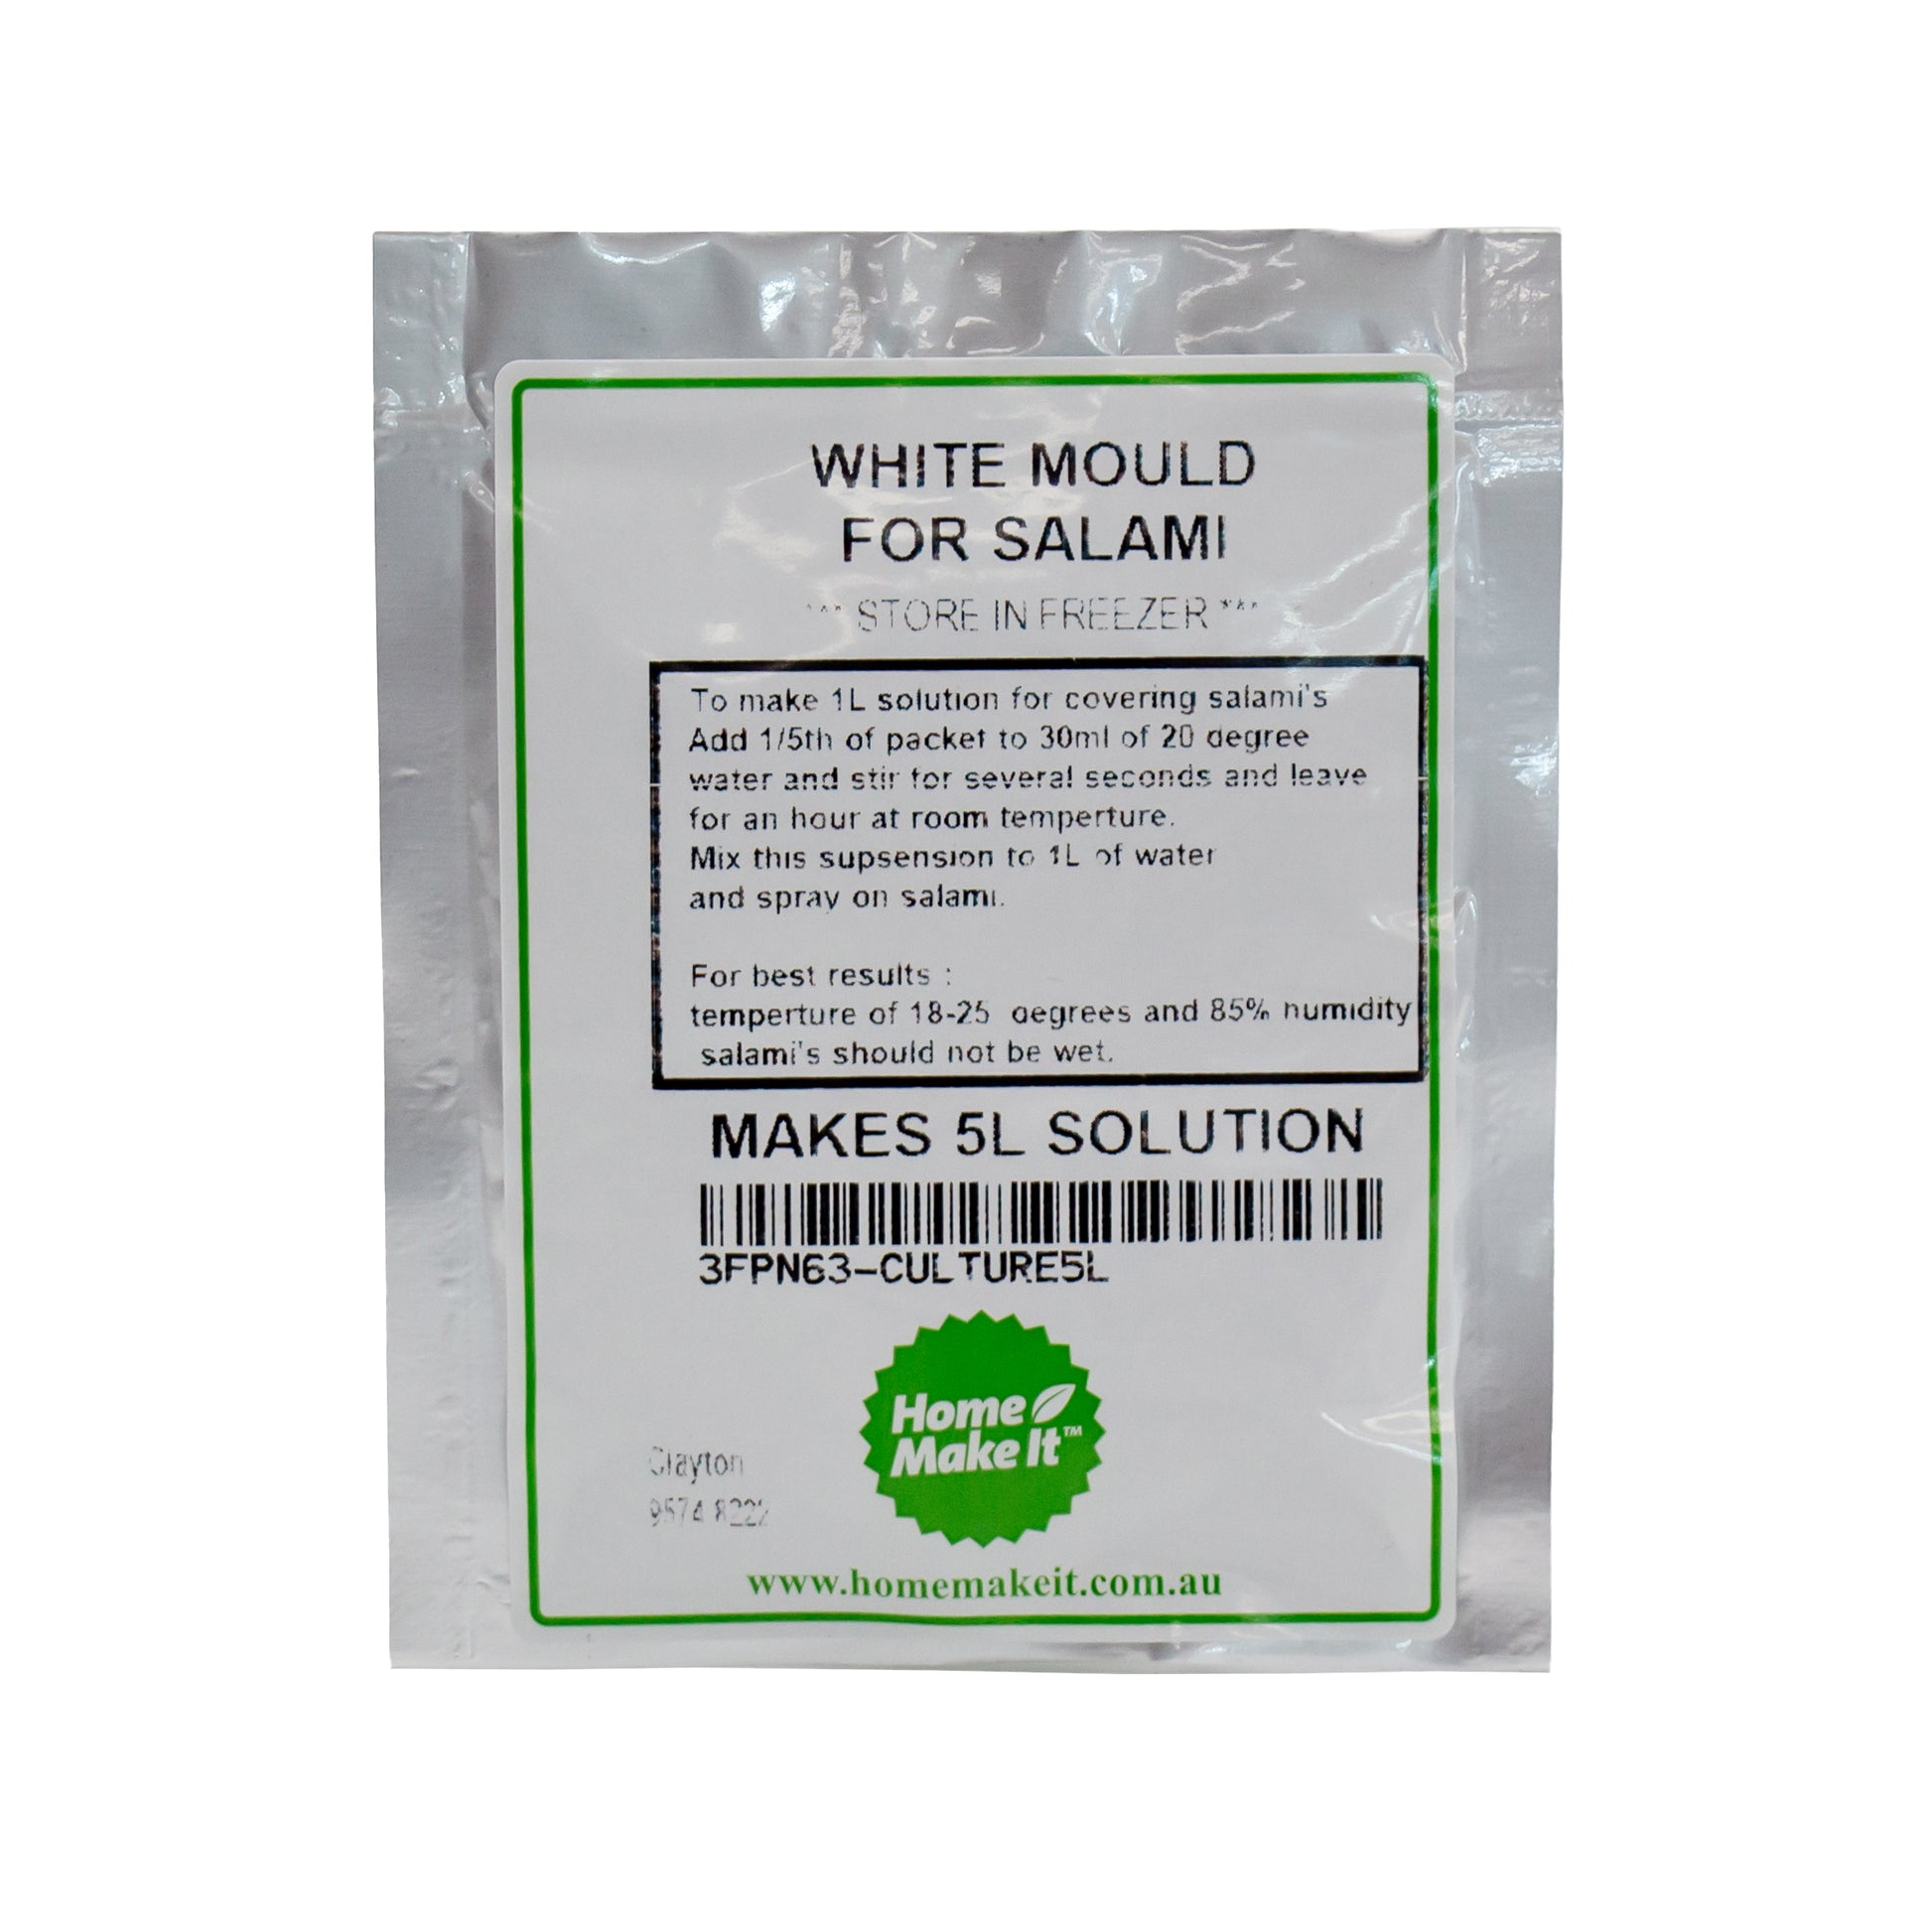 packet of white mould culture for salami making. Packet makes 5 litres of solution